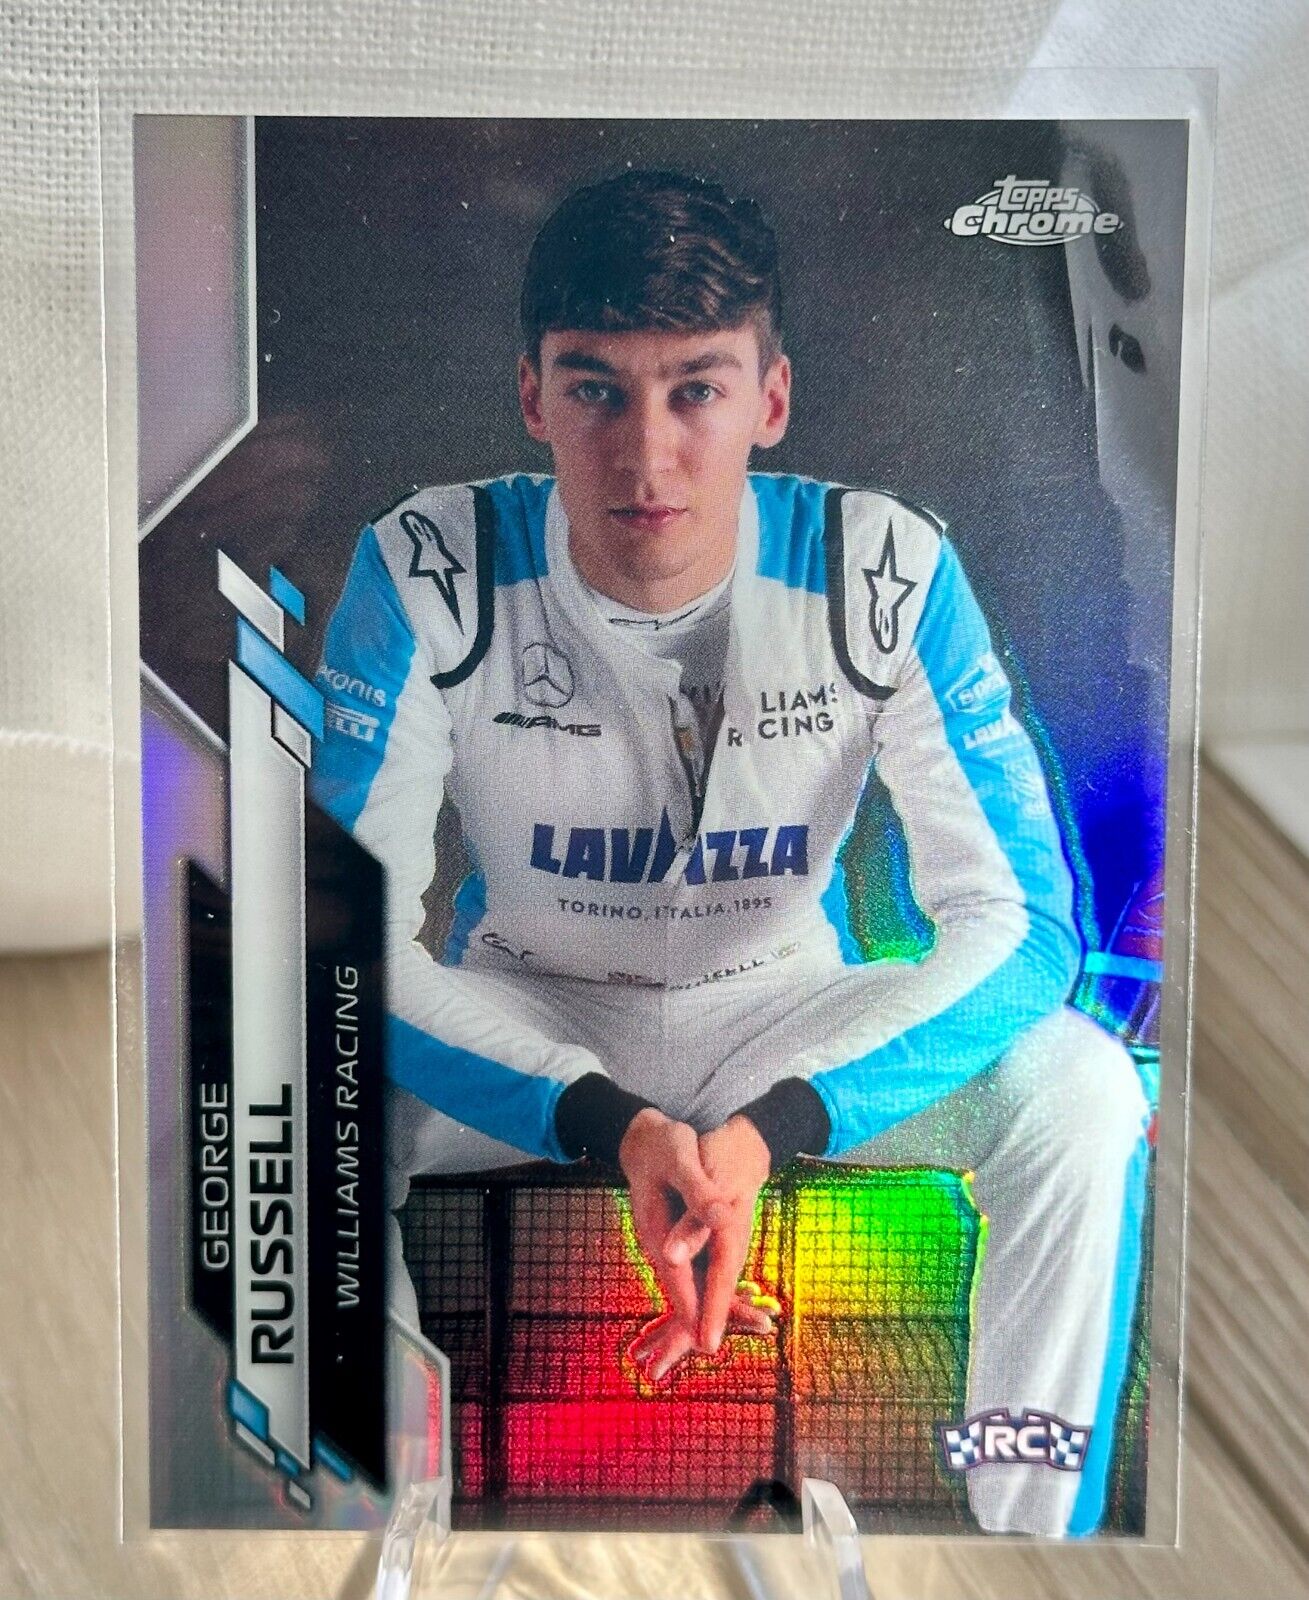 2020 Topps Chrome F1 George Russell #19 SP - Formula 1 Variation Refractor